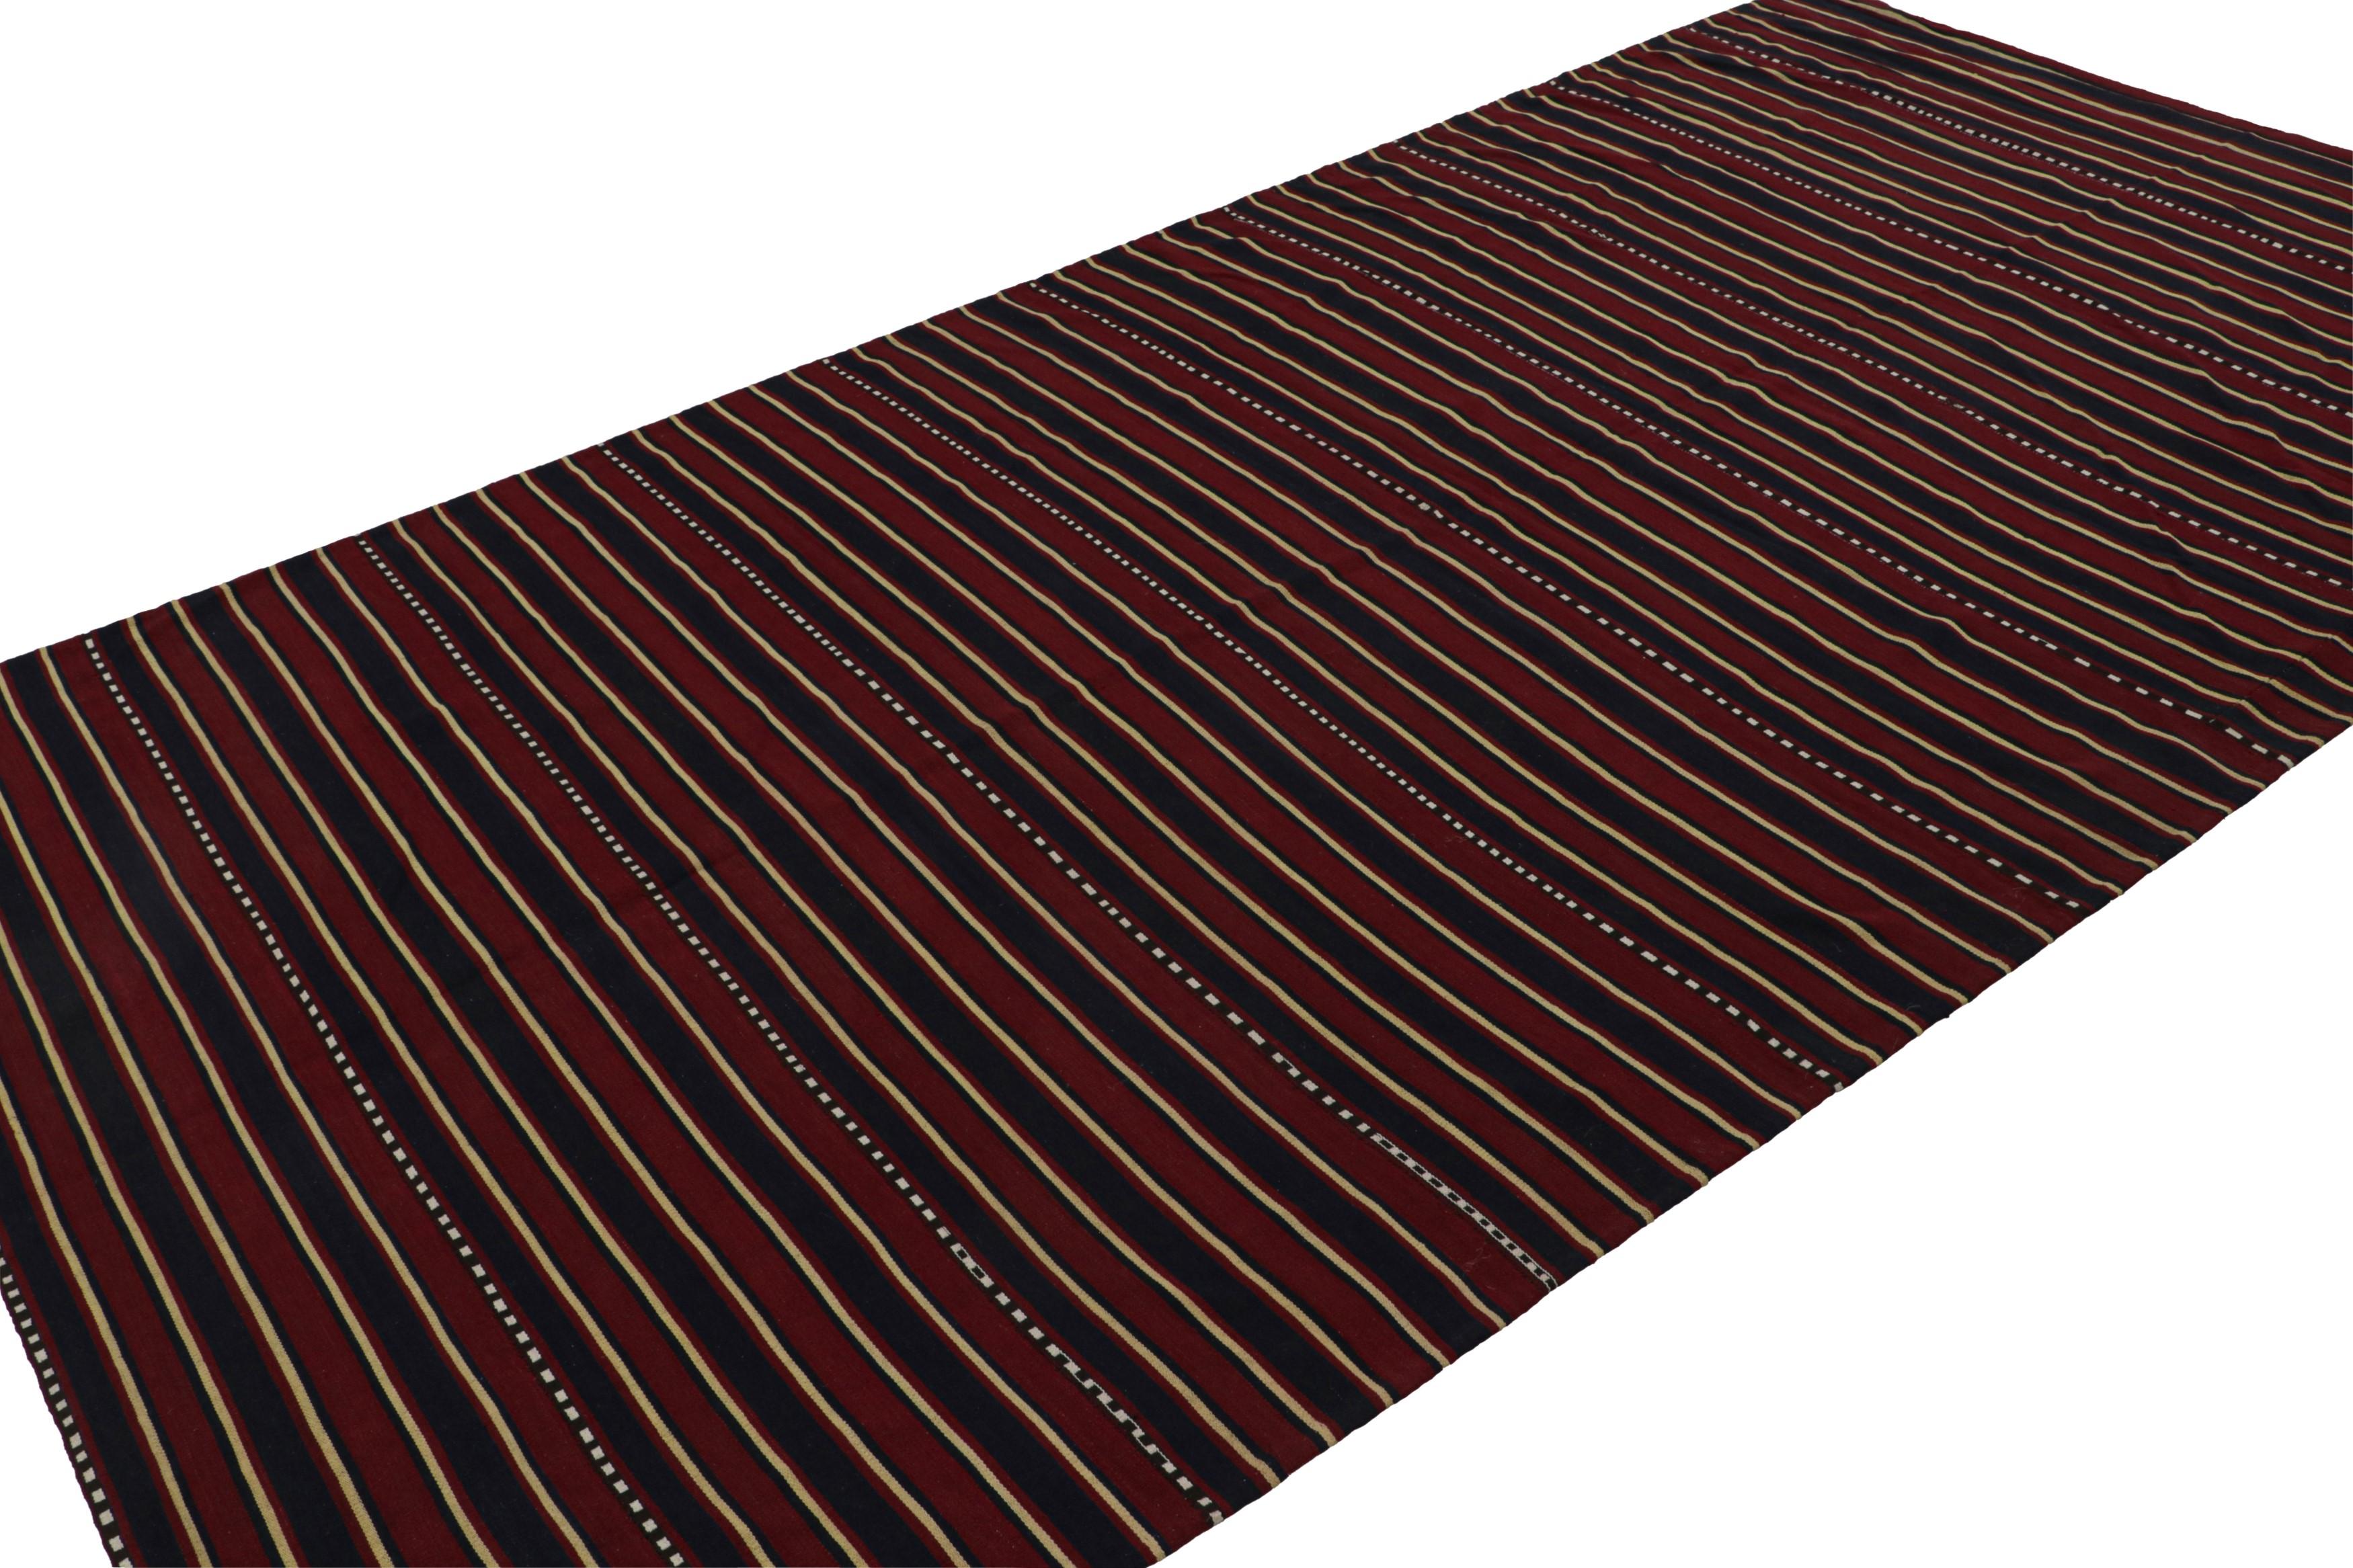 Handwoven in wool, circa 1950-1960, this 6x11 vintage Afghan tribal kilim rug, with horizontal stripes, features quintessential colors of this provenance, done masterfully in saturated tones and simple repeat. 

On the Design:

 Featuring repetitive